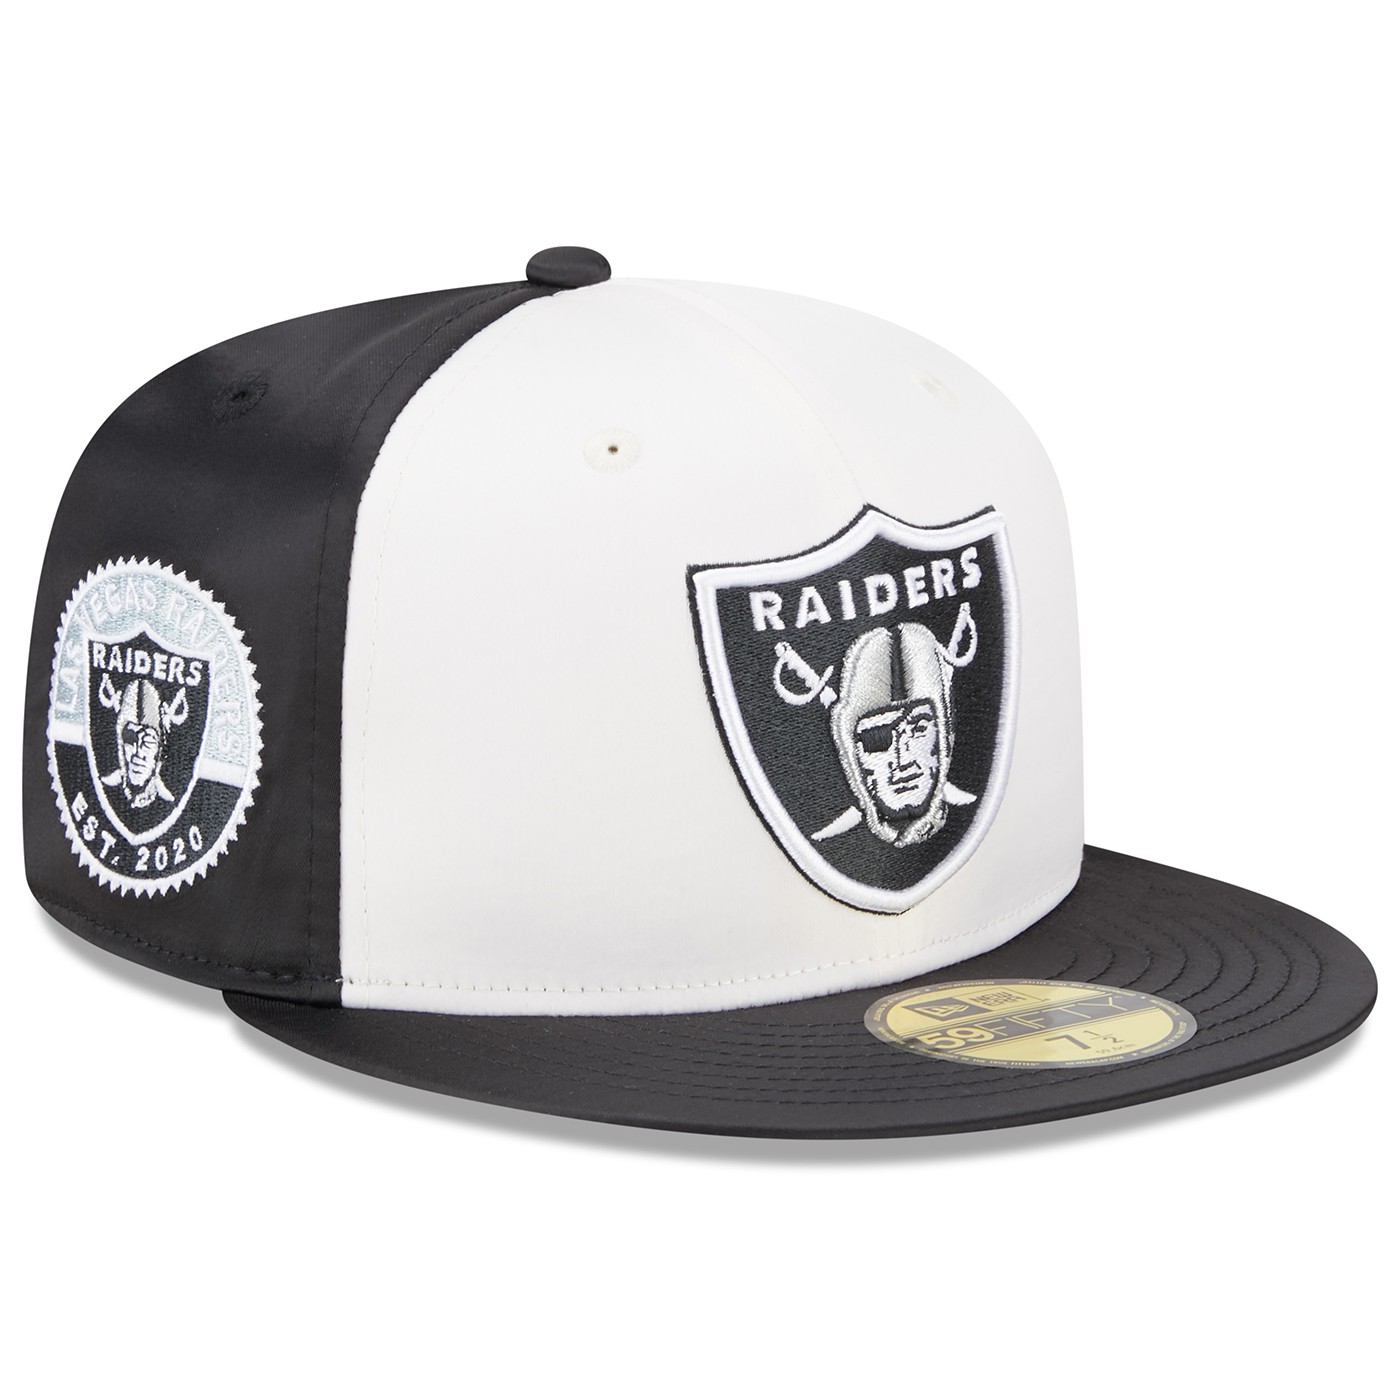 Product Detail | NEW ERA 59FIFTY SATIN BKWH 7 CAP SHIELD - 